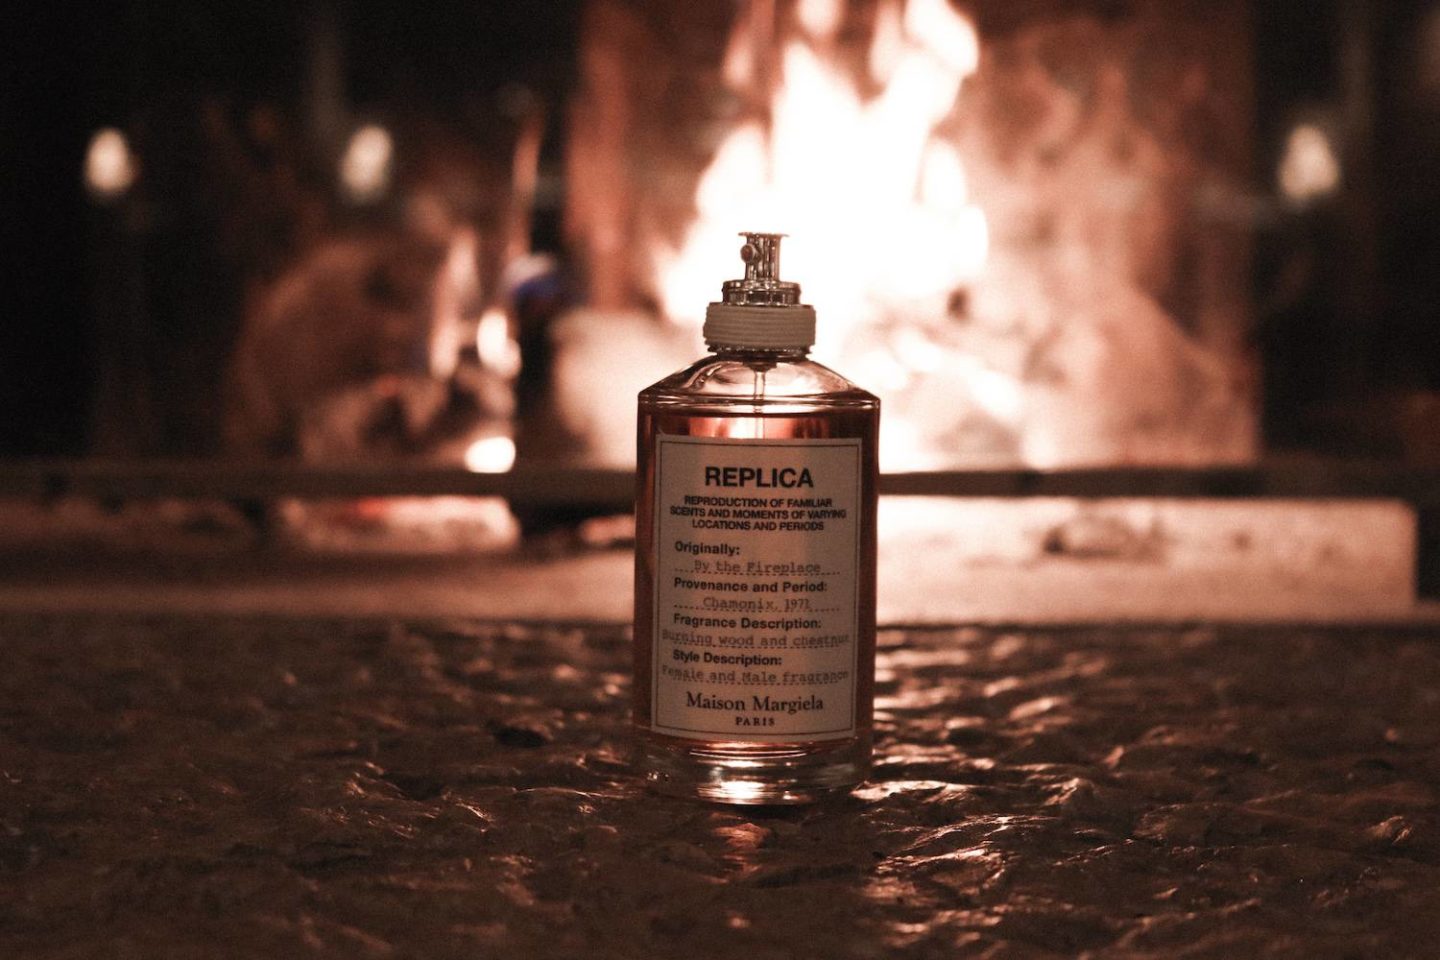 replica by the fireplace fragrance